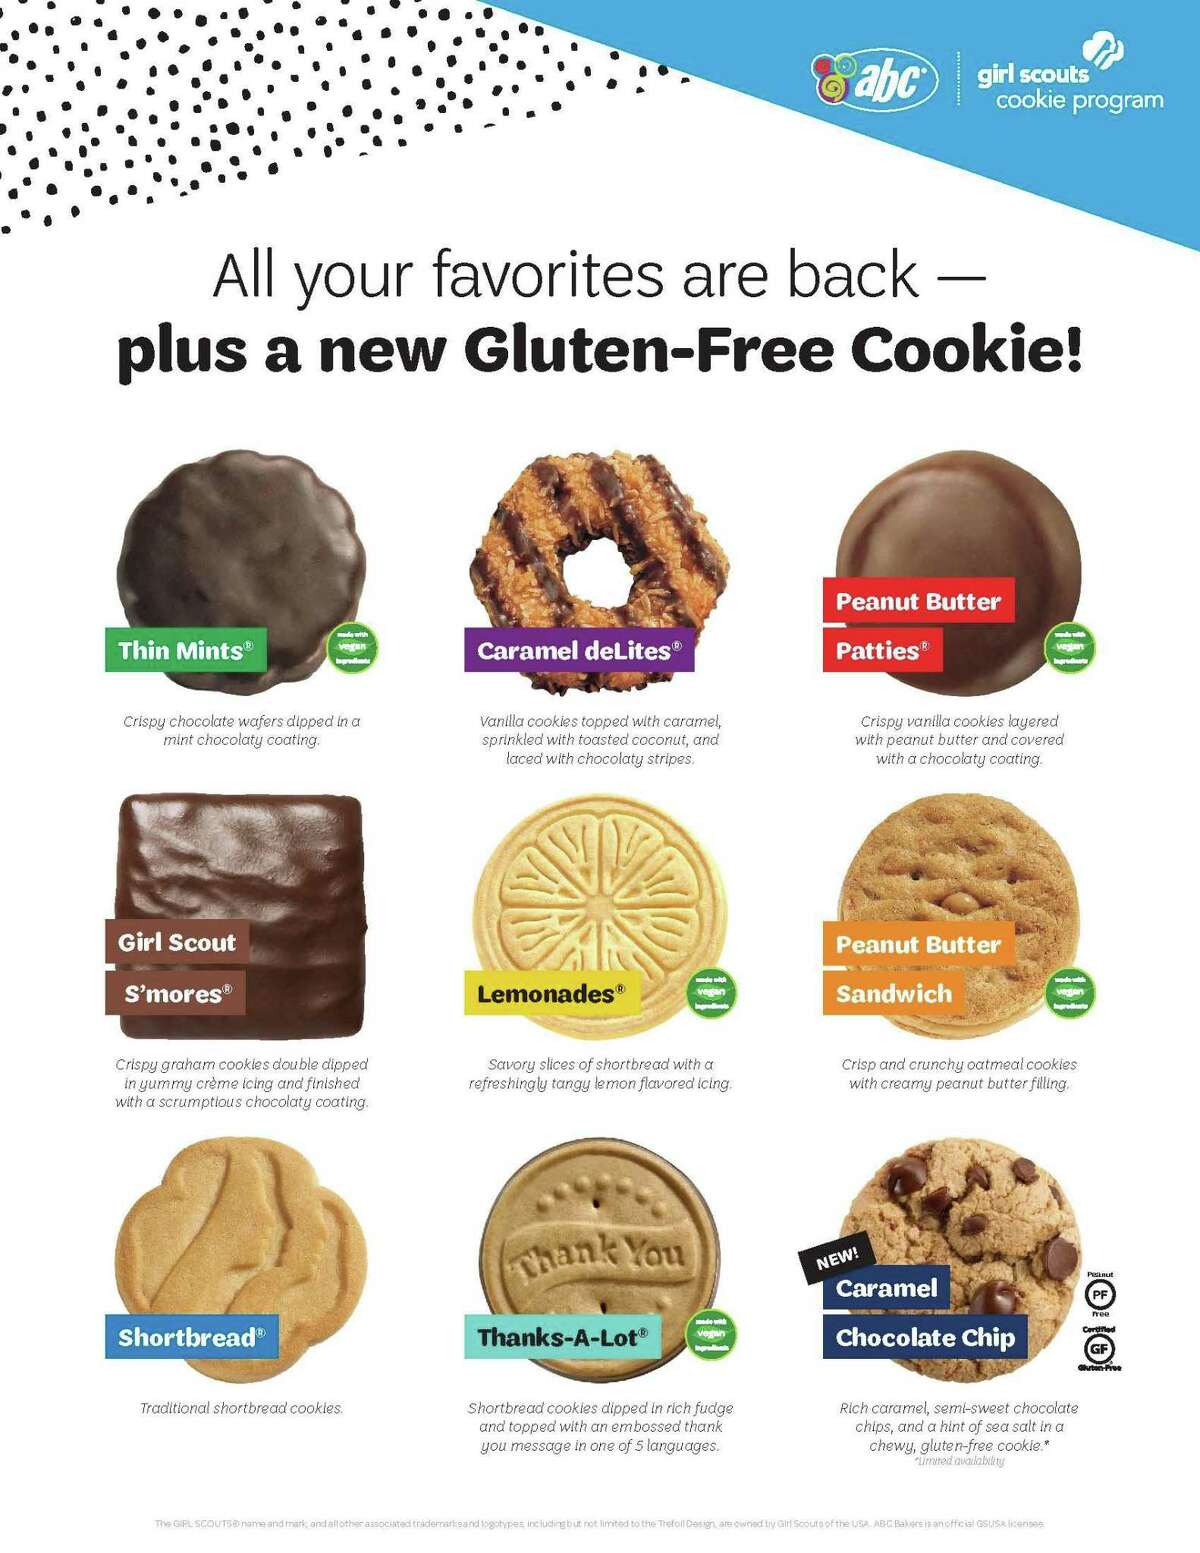 Girl Scouts of San Jacinto Council has launched the 2019 Girl Scout Cookie season, celebrating the largest financial investment in girls annually in the United States and a powerful entrepreneurship incubator for the next generation of female leaders.